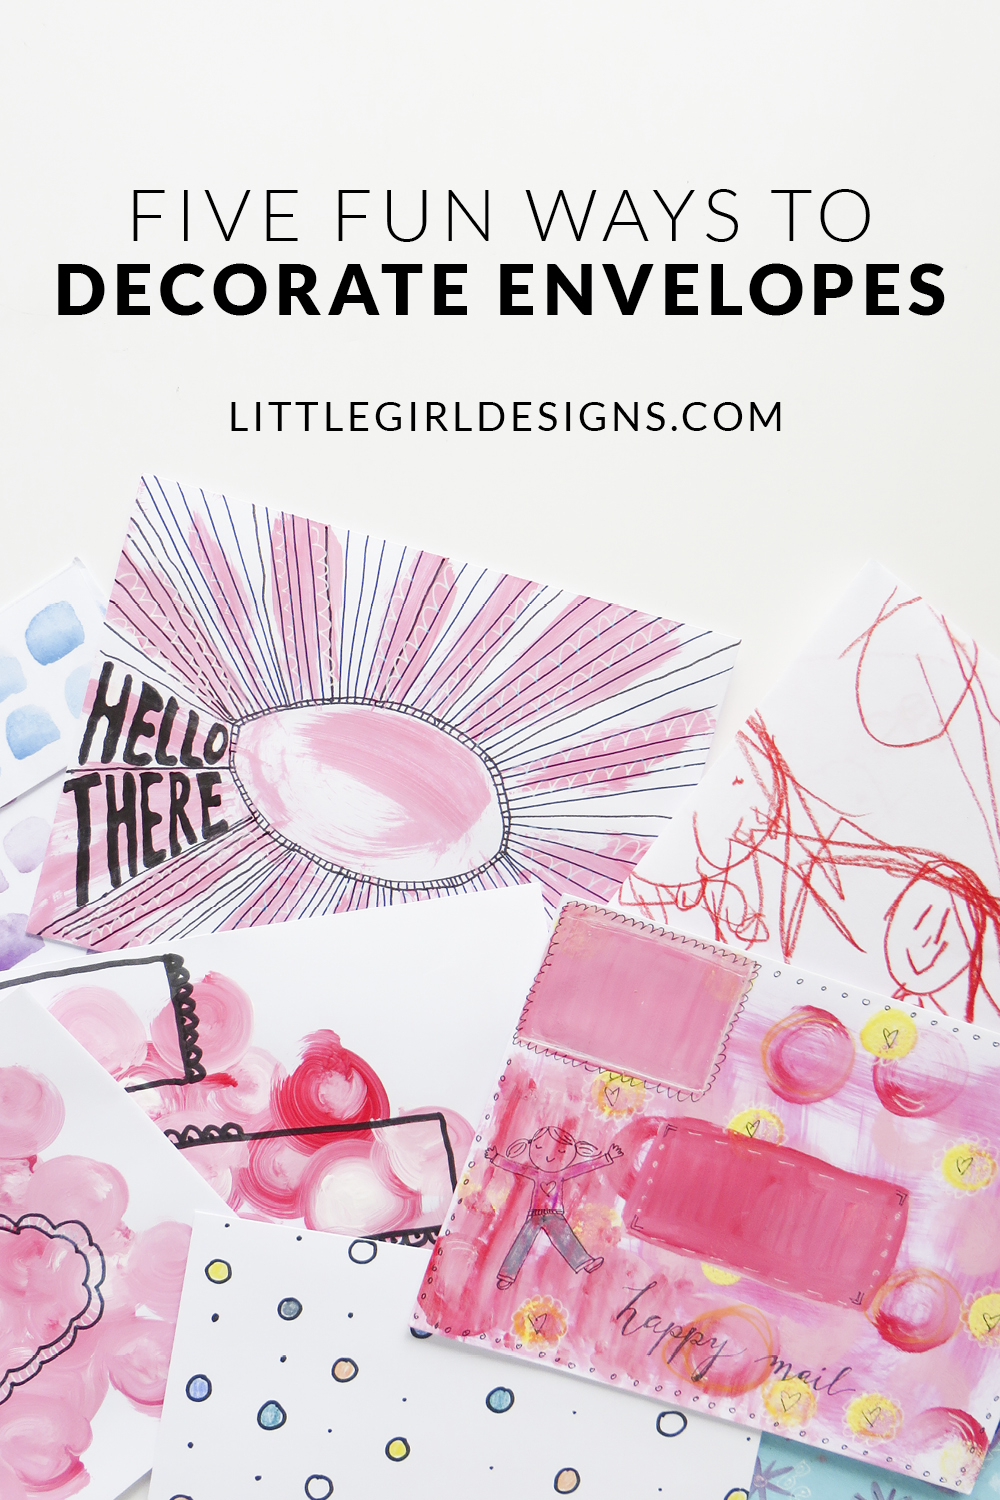 Pull out a stack of blank envelopes and let's get to decorating! Why send plain envelopes through the mail when you can add your own personal touch? Click through to learn five fun (and easy) ways to personalize your snail mail!